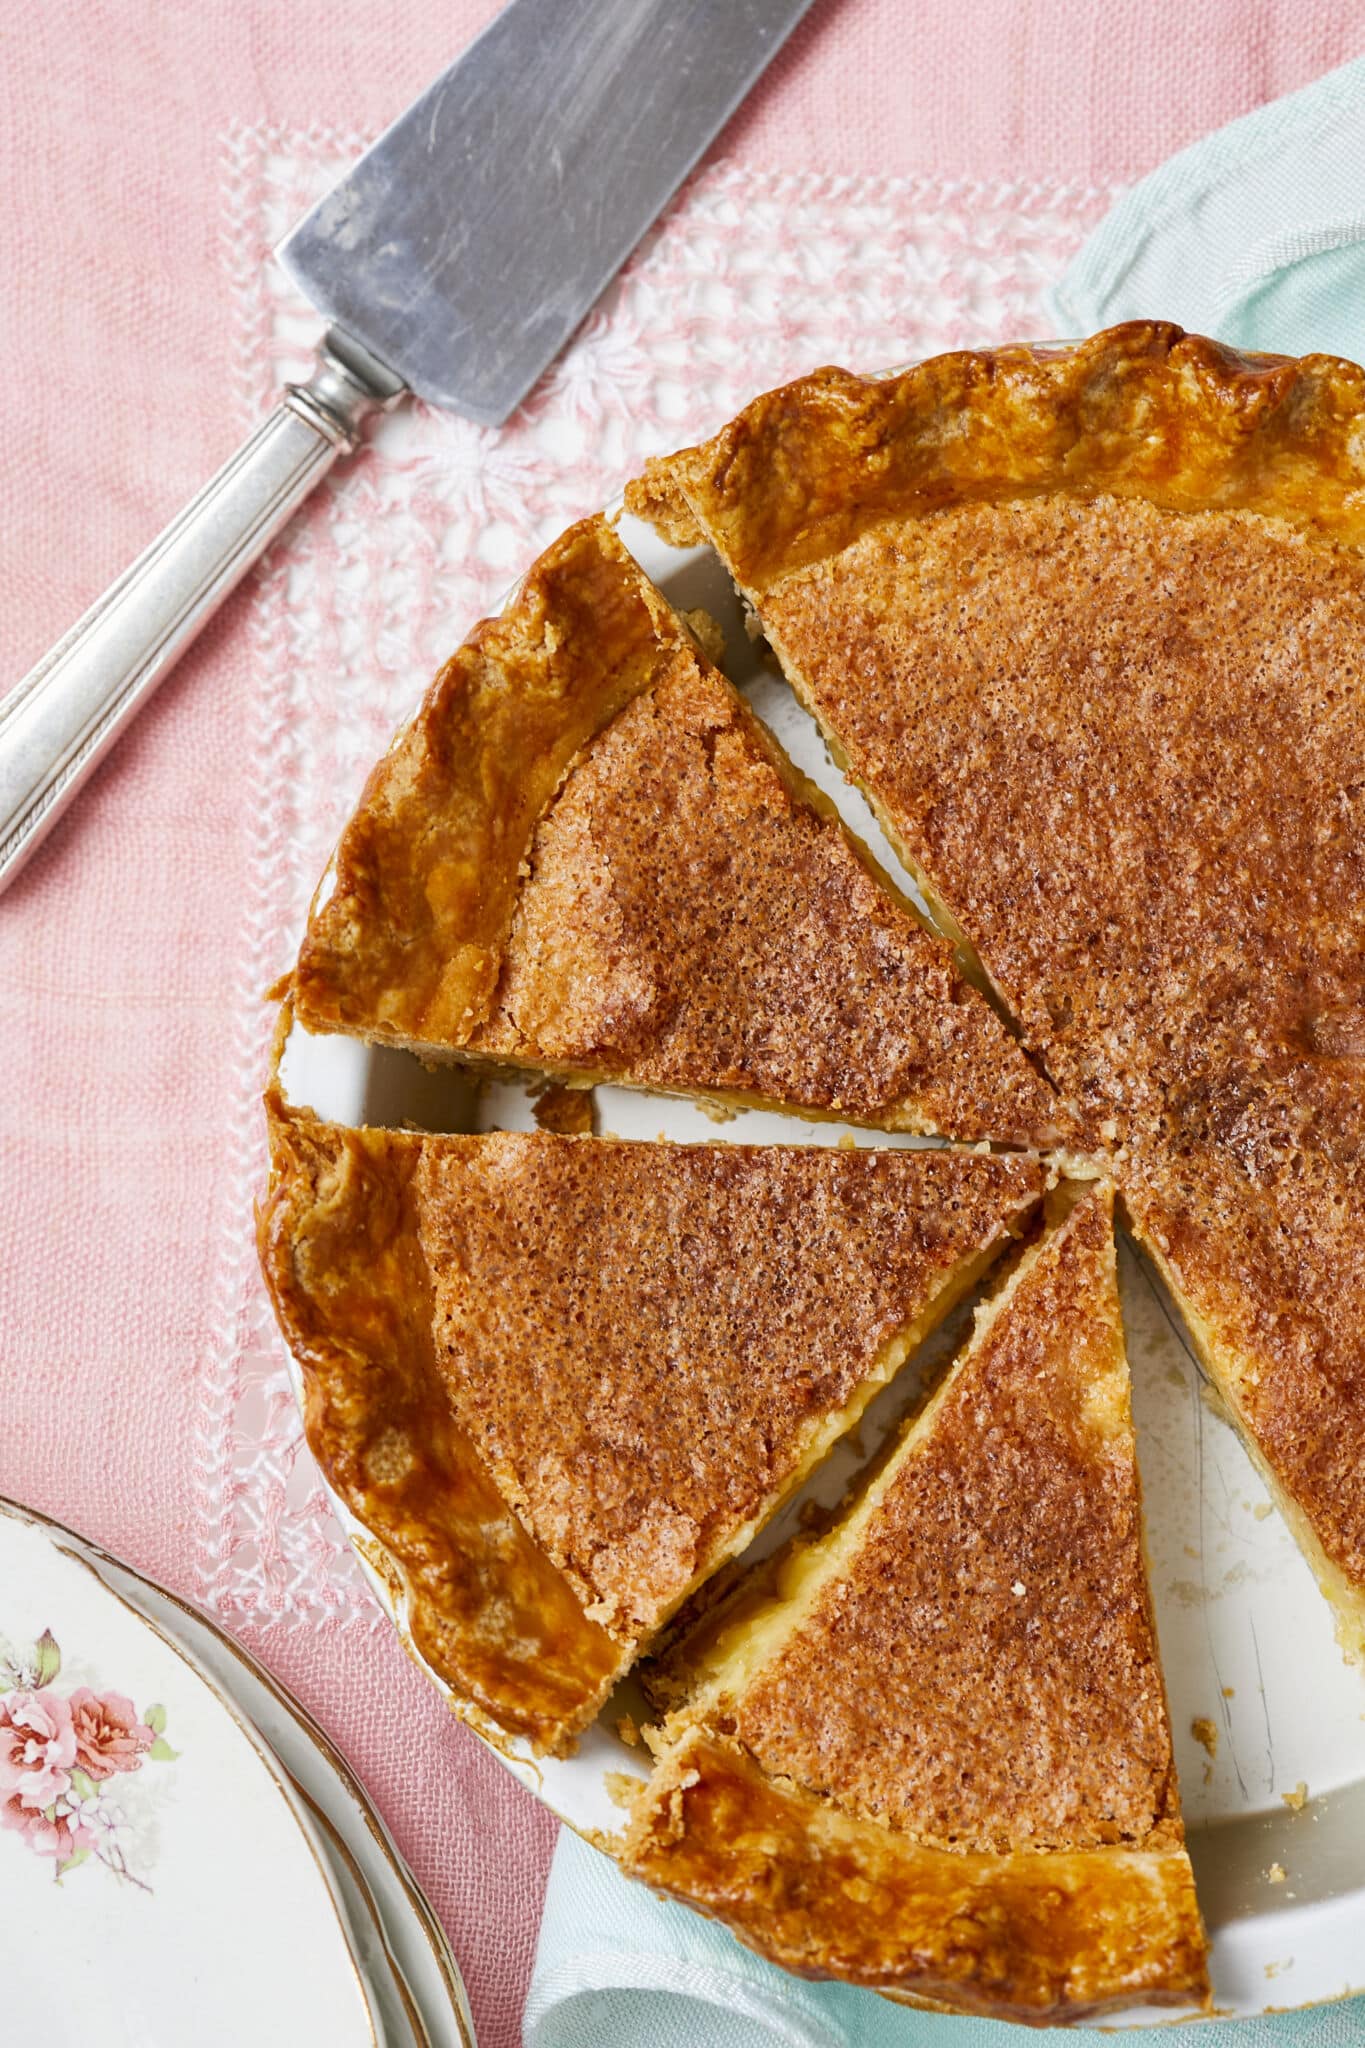 A Classic Chess Pie is baked to perfection with golden brown color all around the edge and the surface of the filling. The crust is very flaky and the caramelized topping is crispy. Half of the pie is cut into four slices and one slice has been removed from the pie dish. 